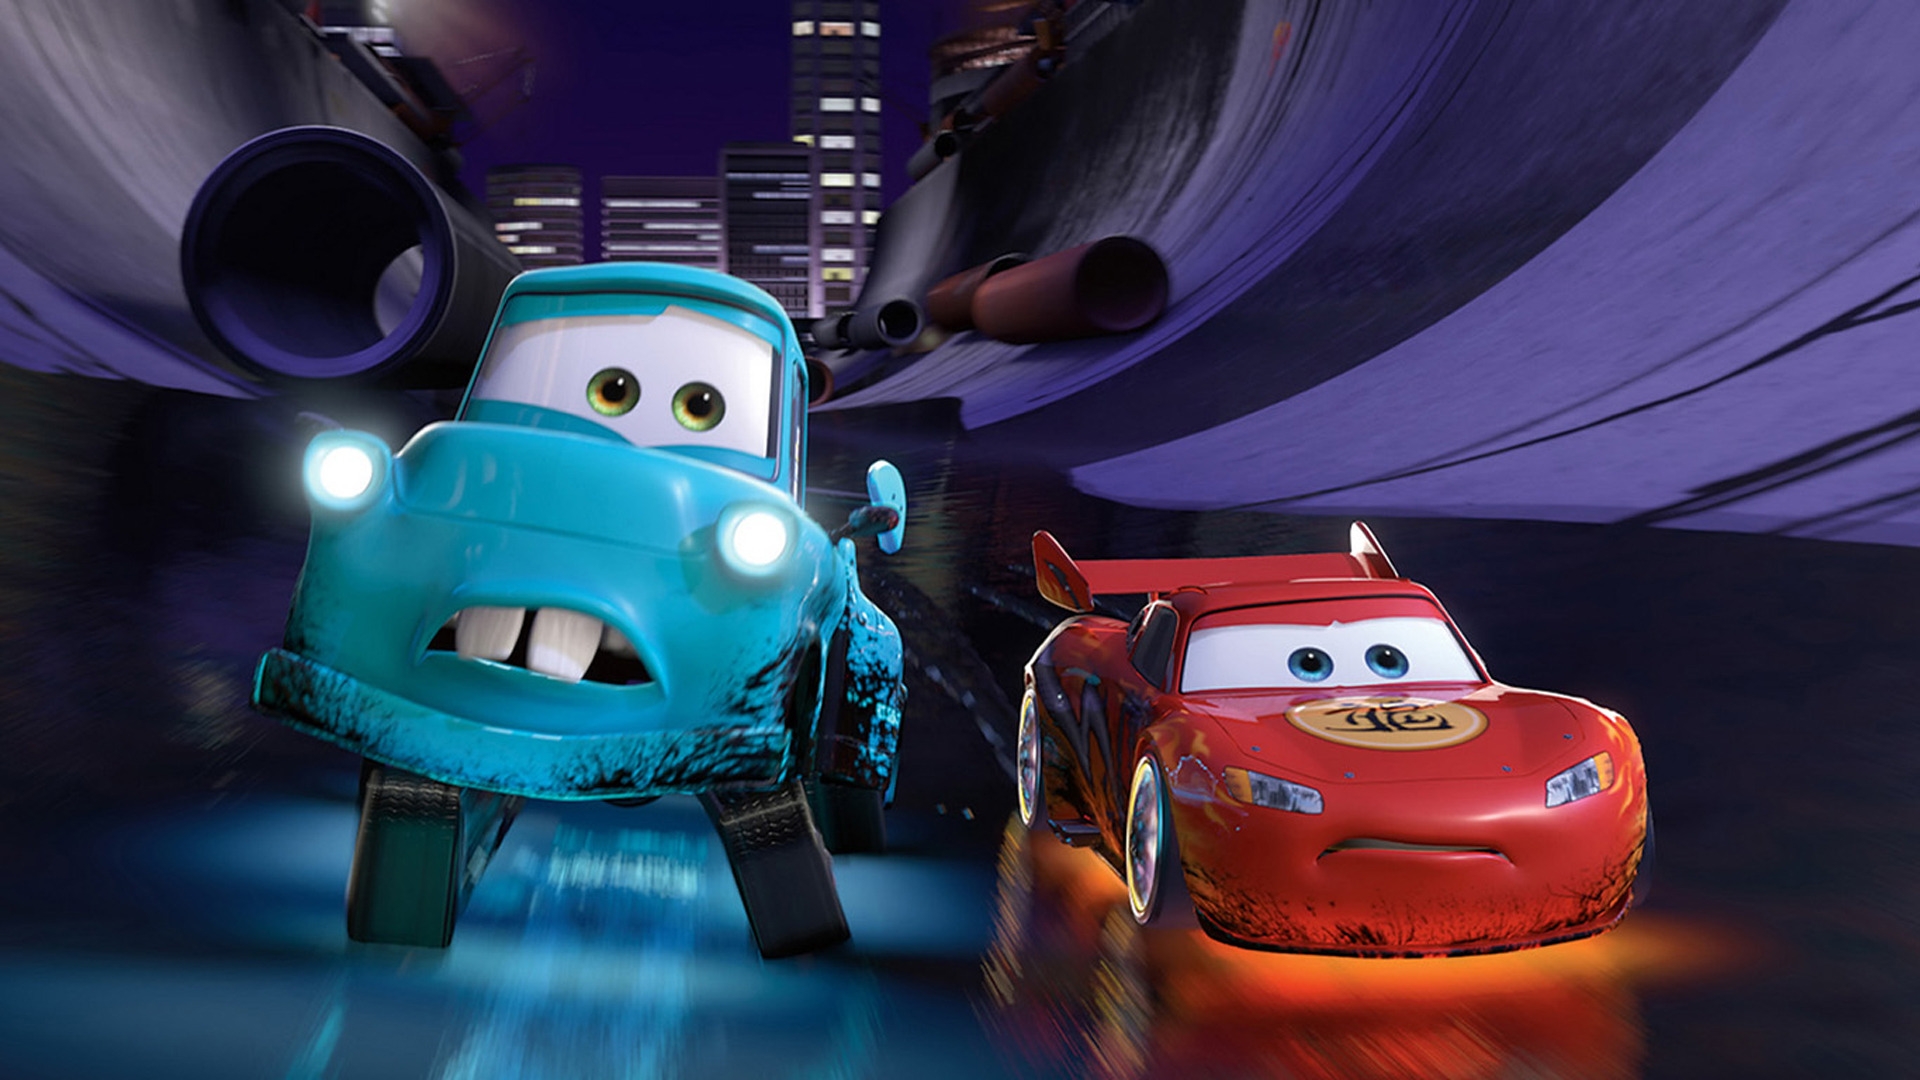 Cars 2 Lightning McQueen and Mater for 1920 x 1080 HDTV 1080p resolution